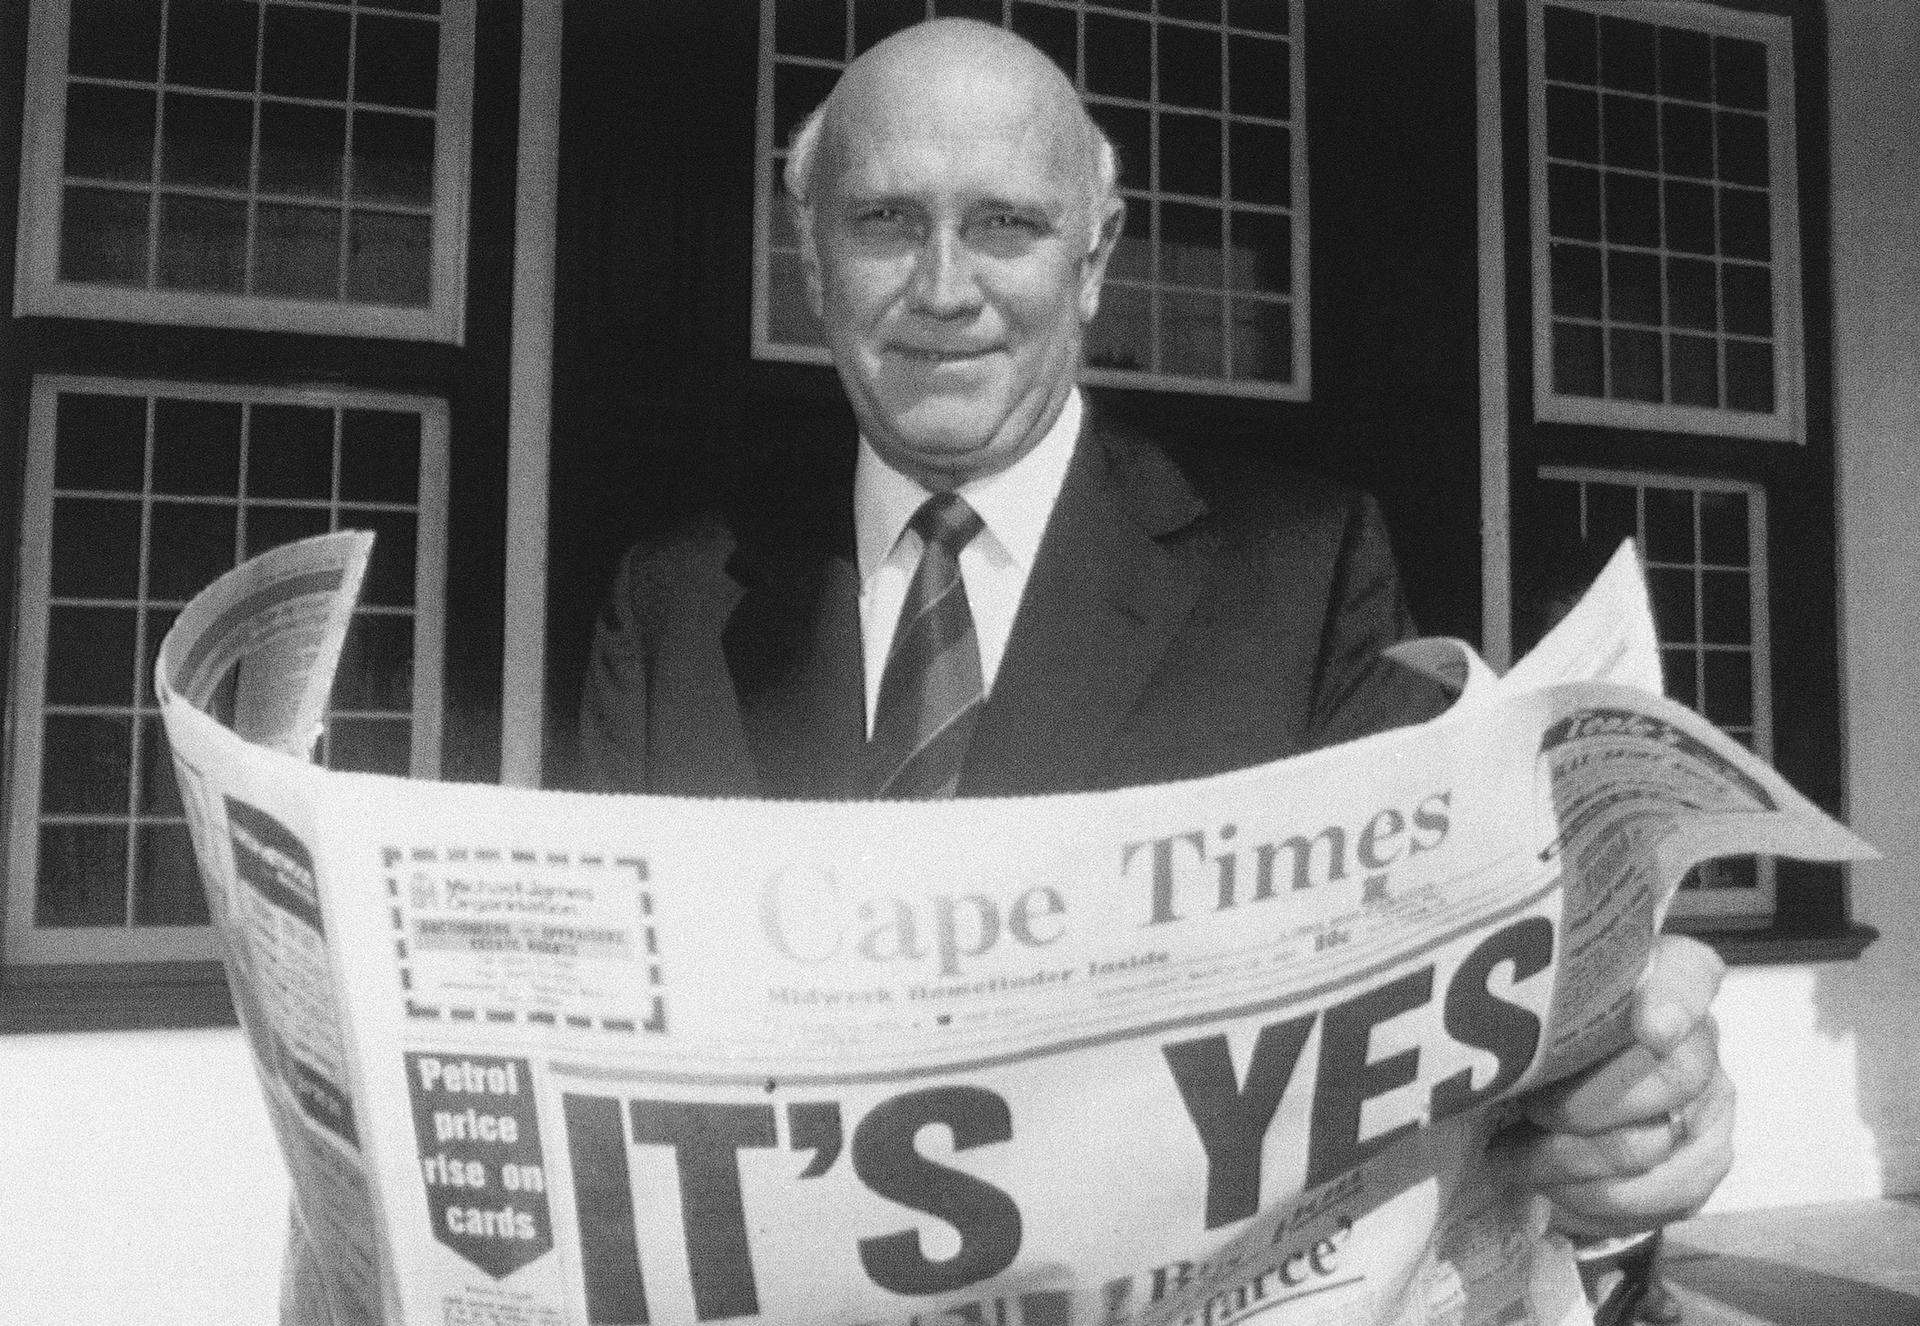 South African President FW de Klerk poses outside his office in Cape Town, South Africa March 18, 1992, while displaying a copy of a local newspaper with banner headlines declaring a 